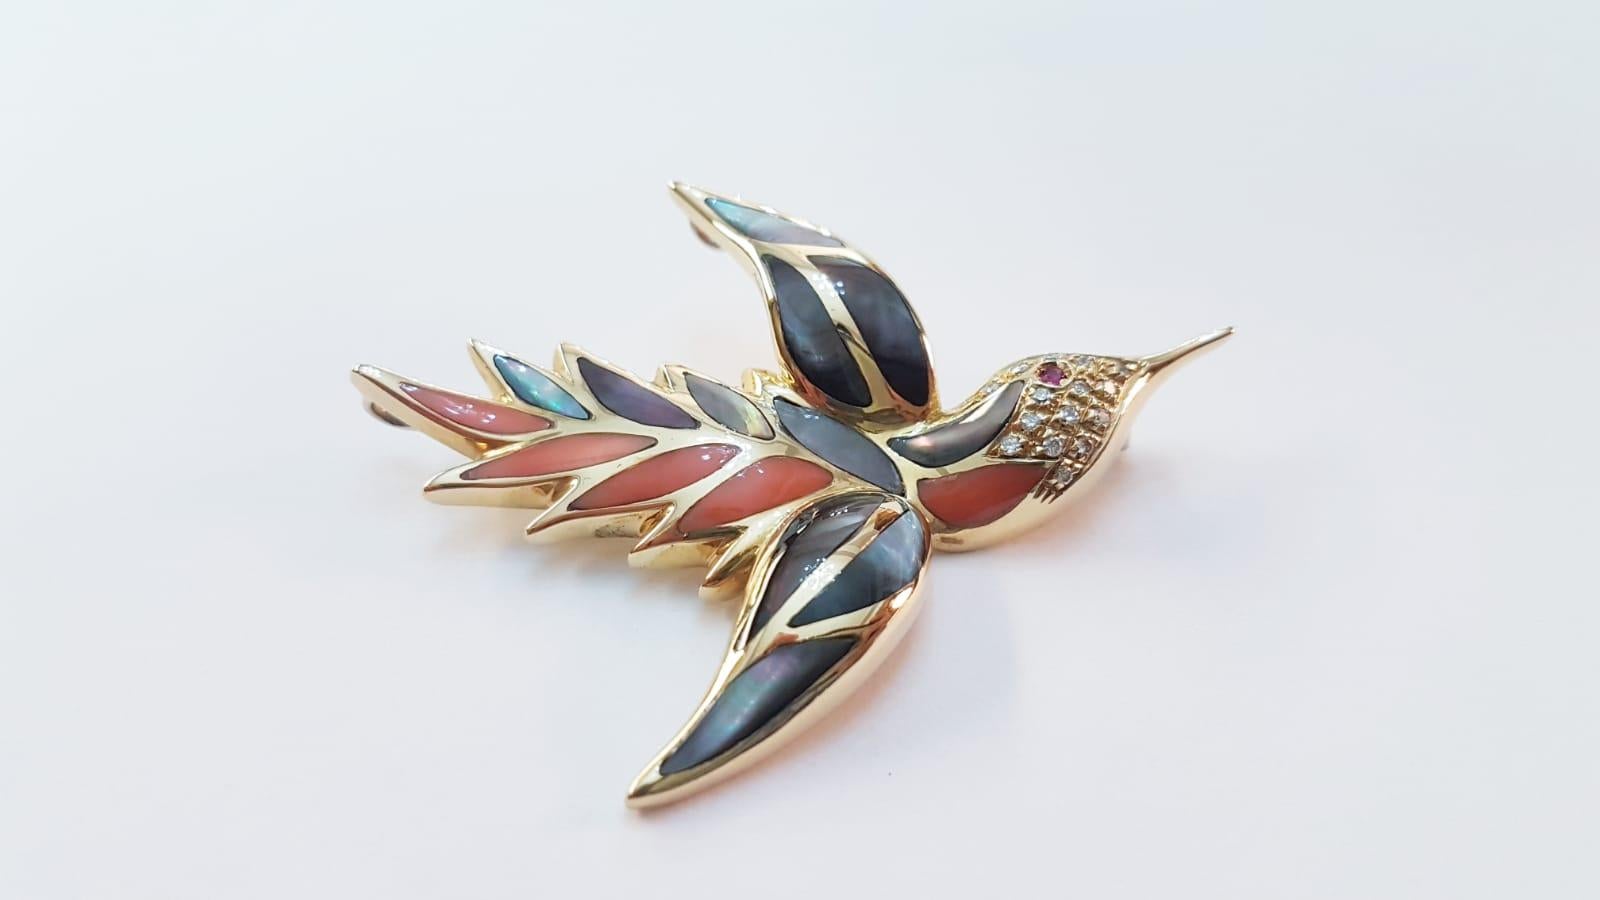 1980s delightful bird brooch by Dirce Repossi, crafted in 18K Yellow Gold, featuring 0,16 carats of brilliant cut diamonds, accented by  0,02 carats of rubies, pink coral and mother-of-pearl. This vibrant and colorful brooch is a must have for all